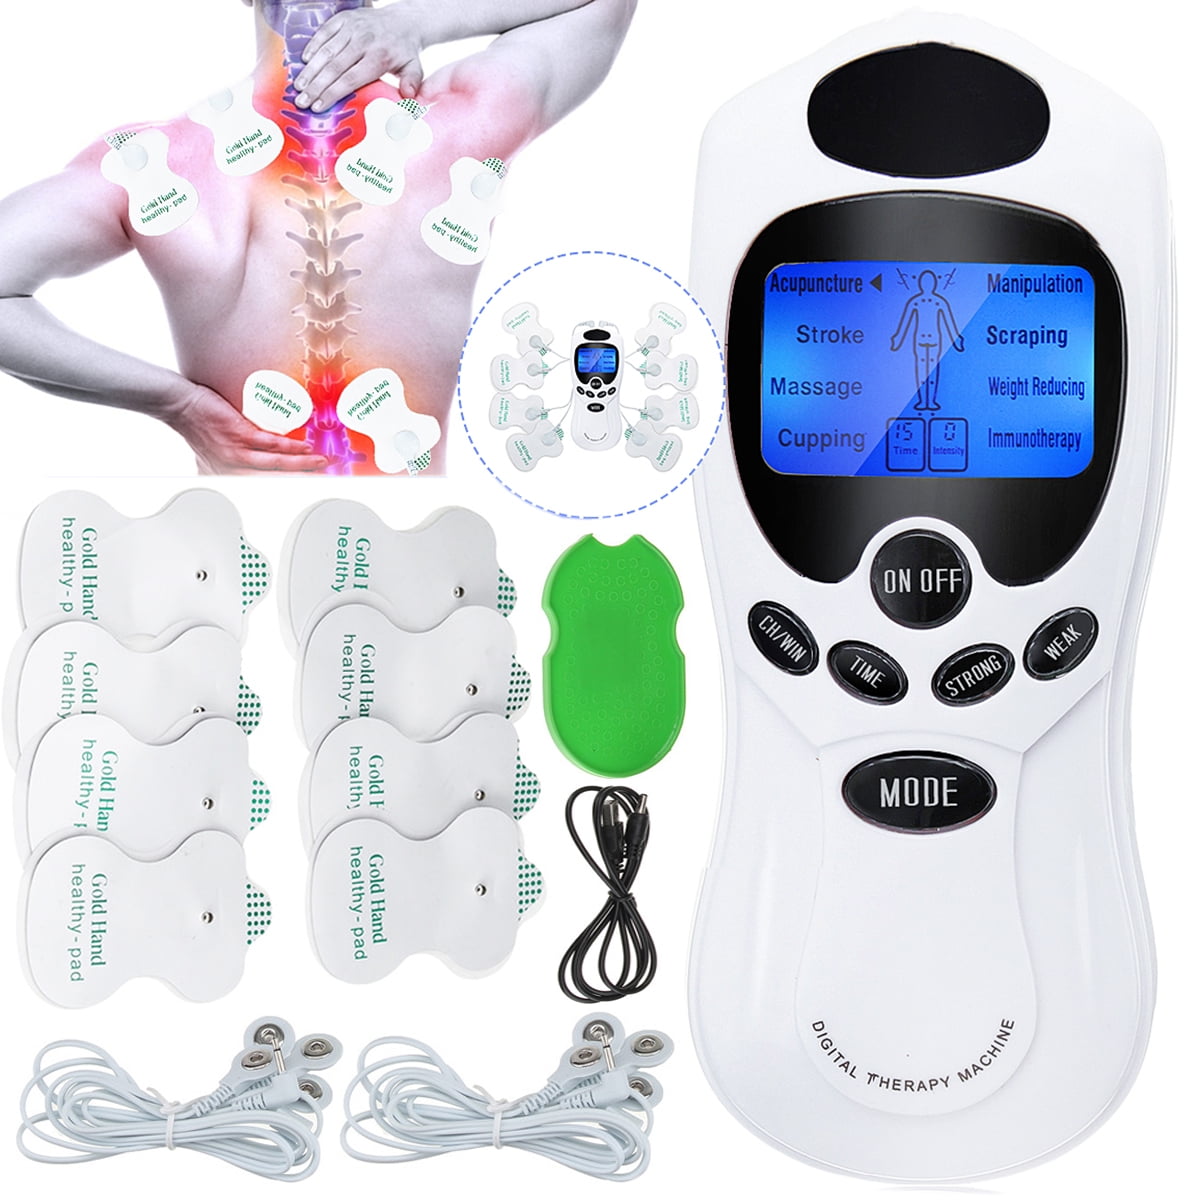 Electrical Muscle Relax Tens Acupuncture Stimulator Massager Therapy Machine AB 